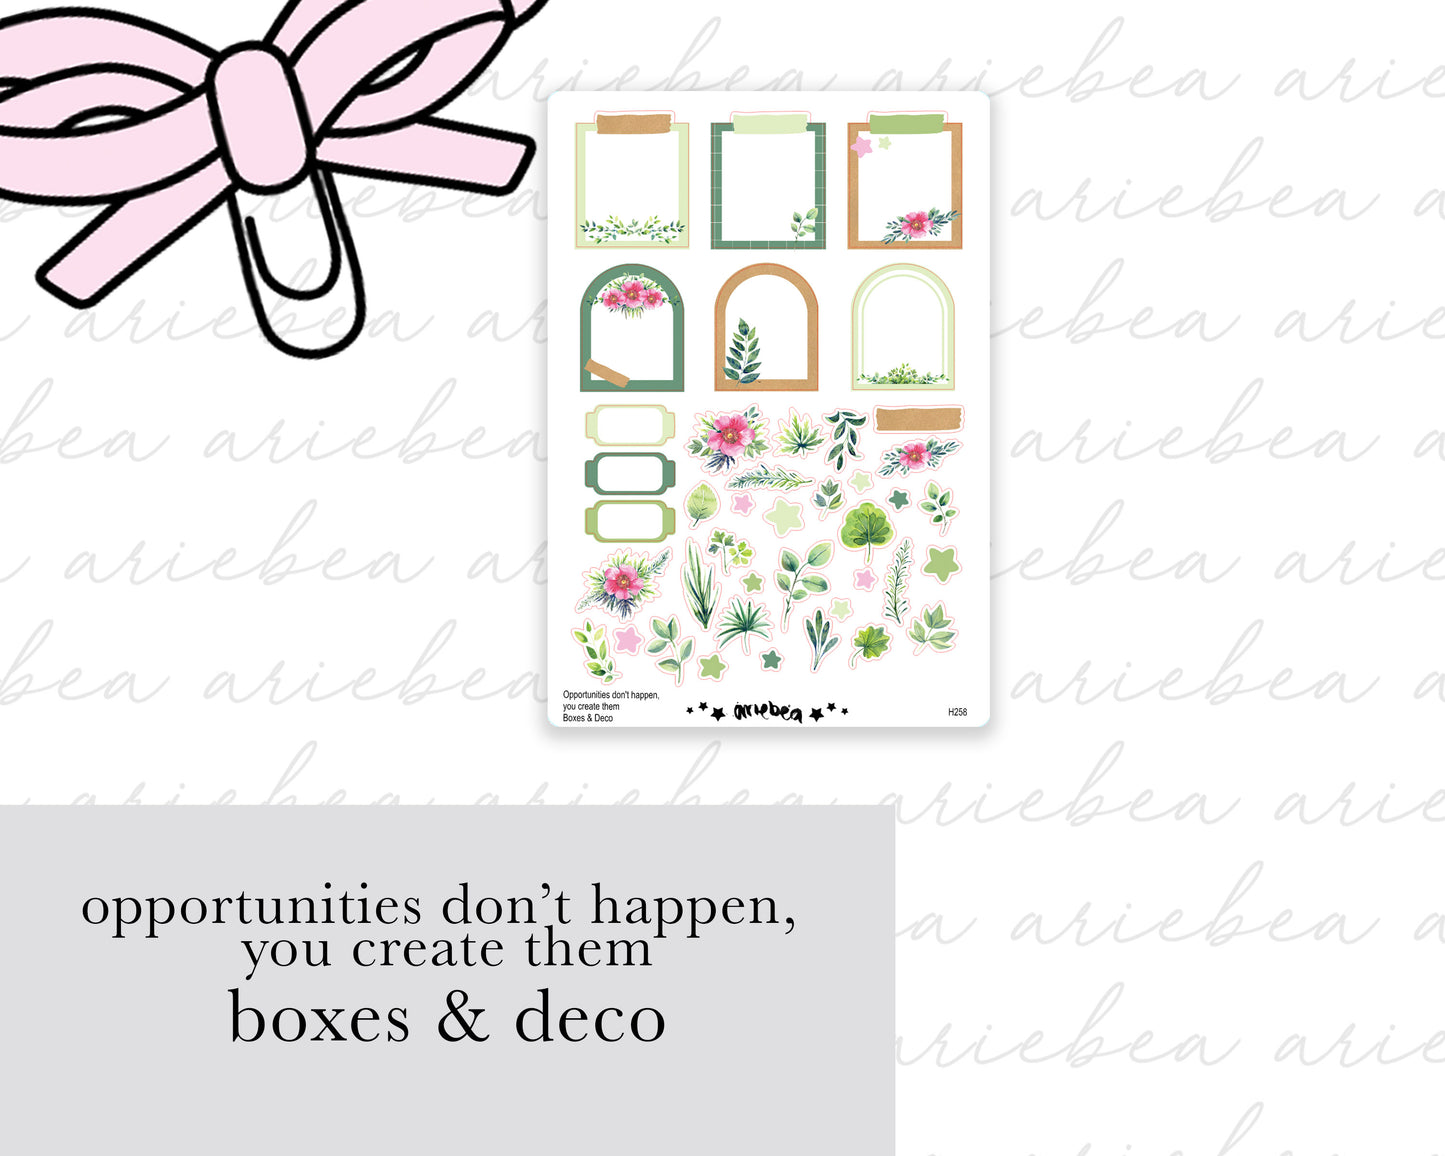 Opportunities don’t happen, you create them Full Mini Kit (4 pages)